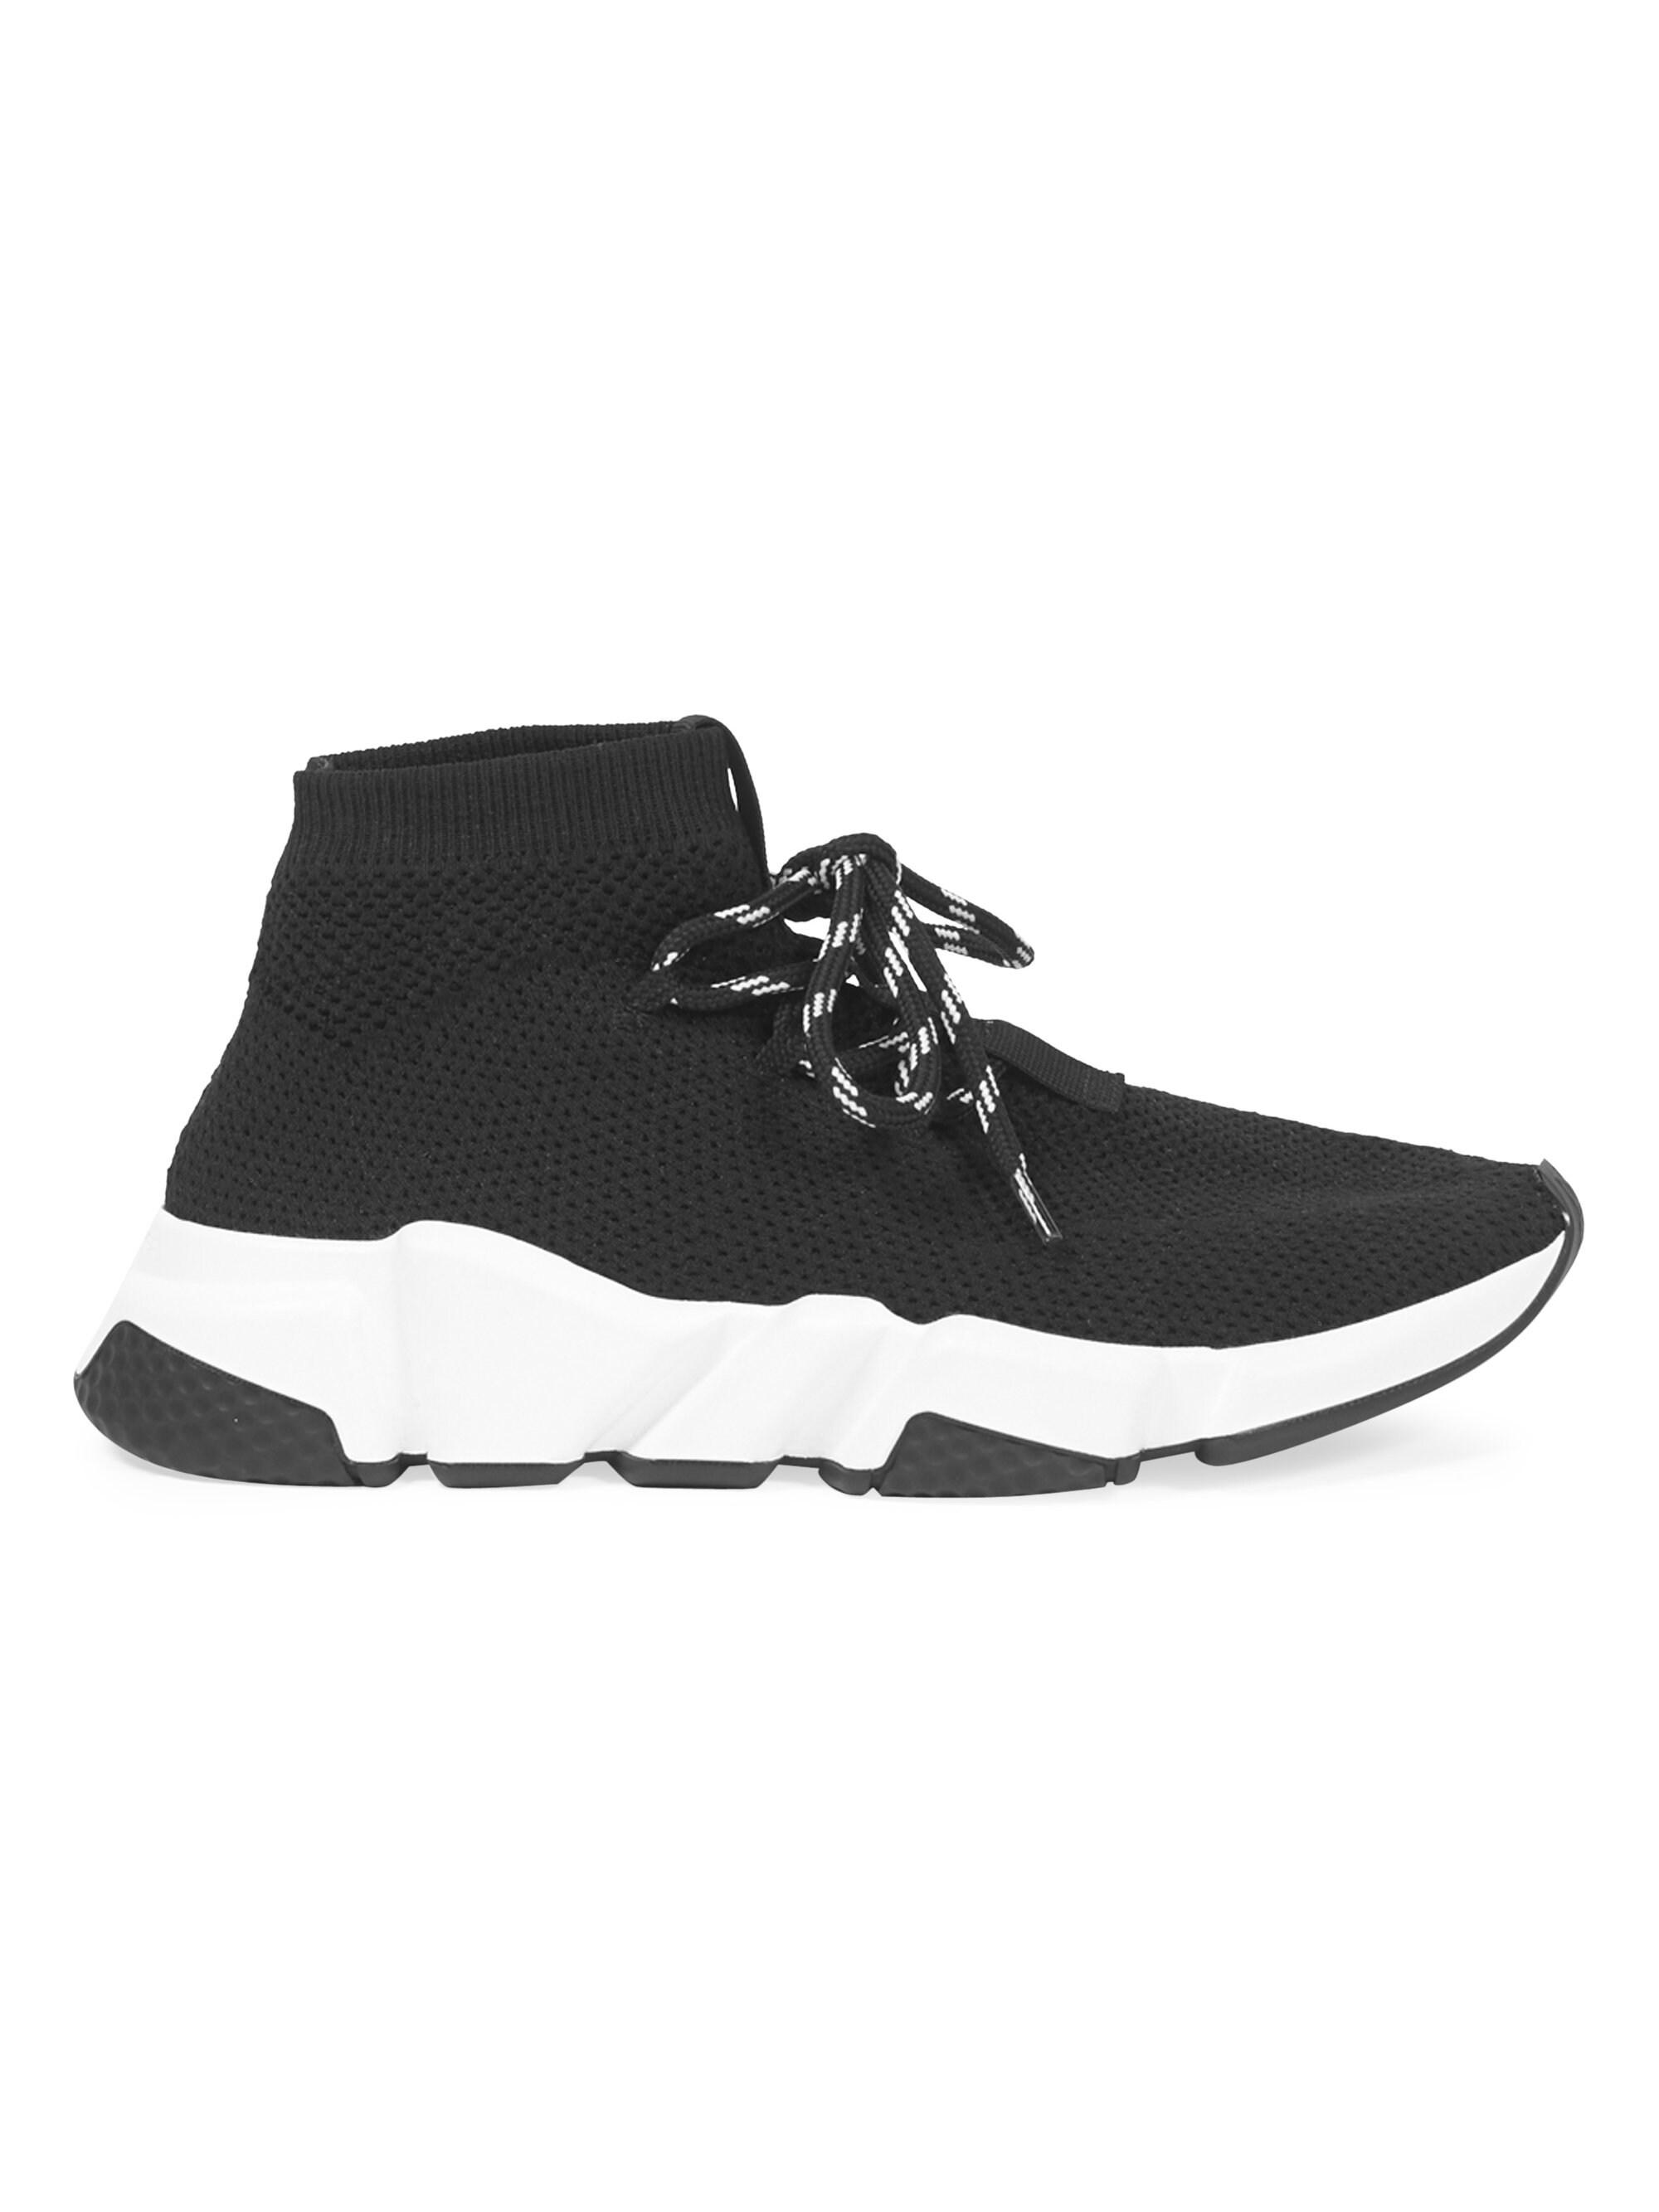 Balenciaga Lace-up Speed Sock Sneakers in Black - Lyst